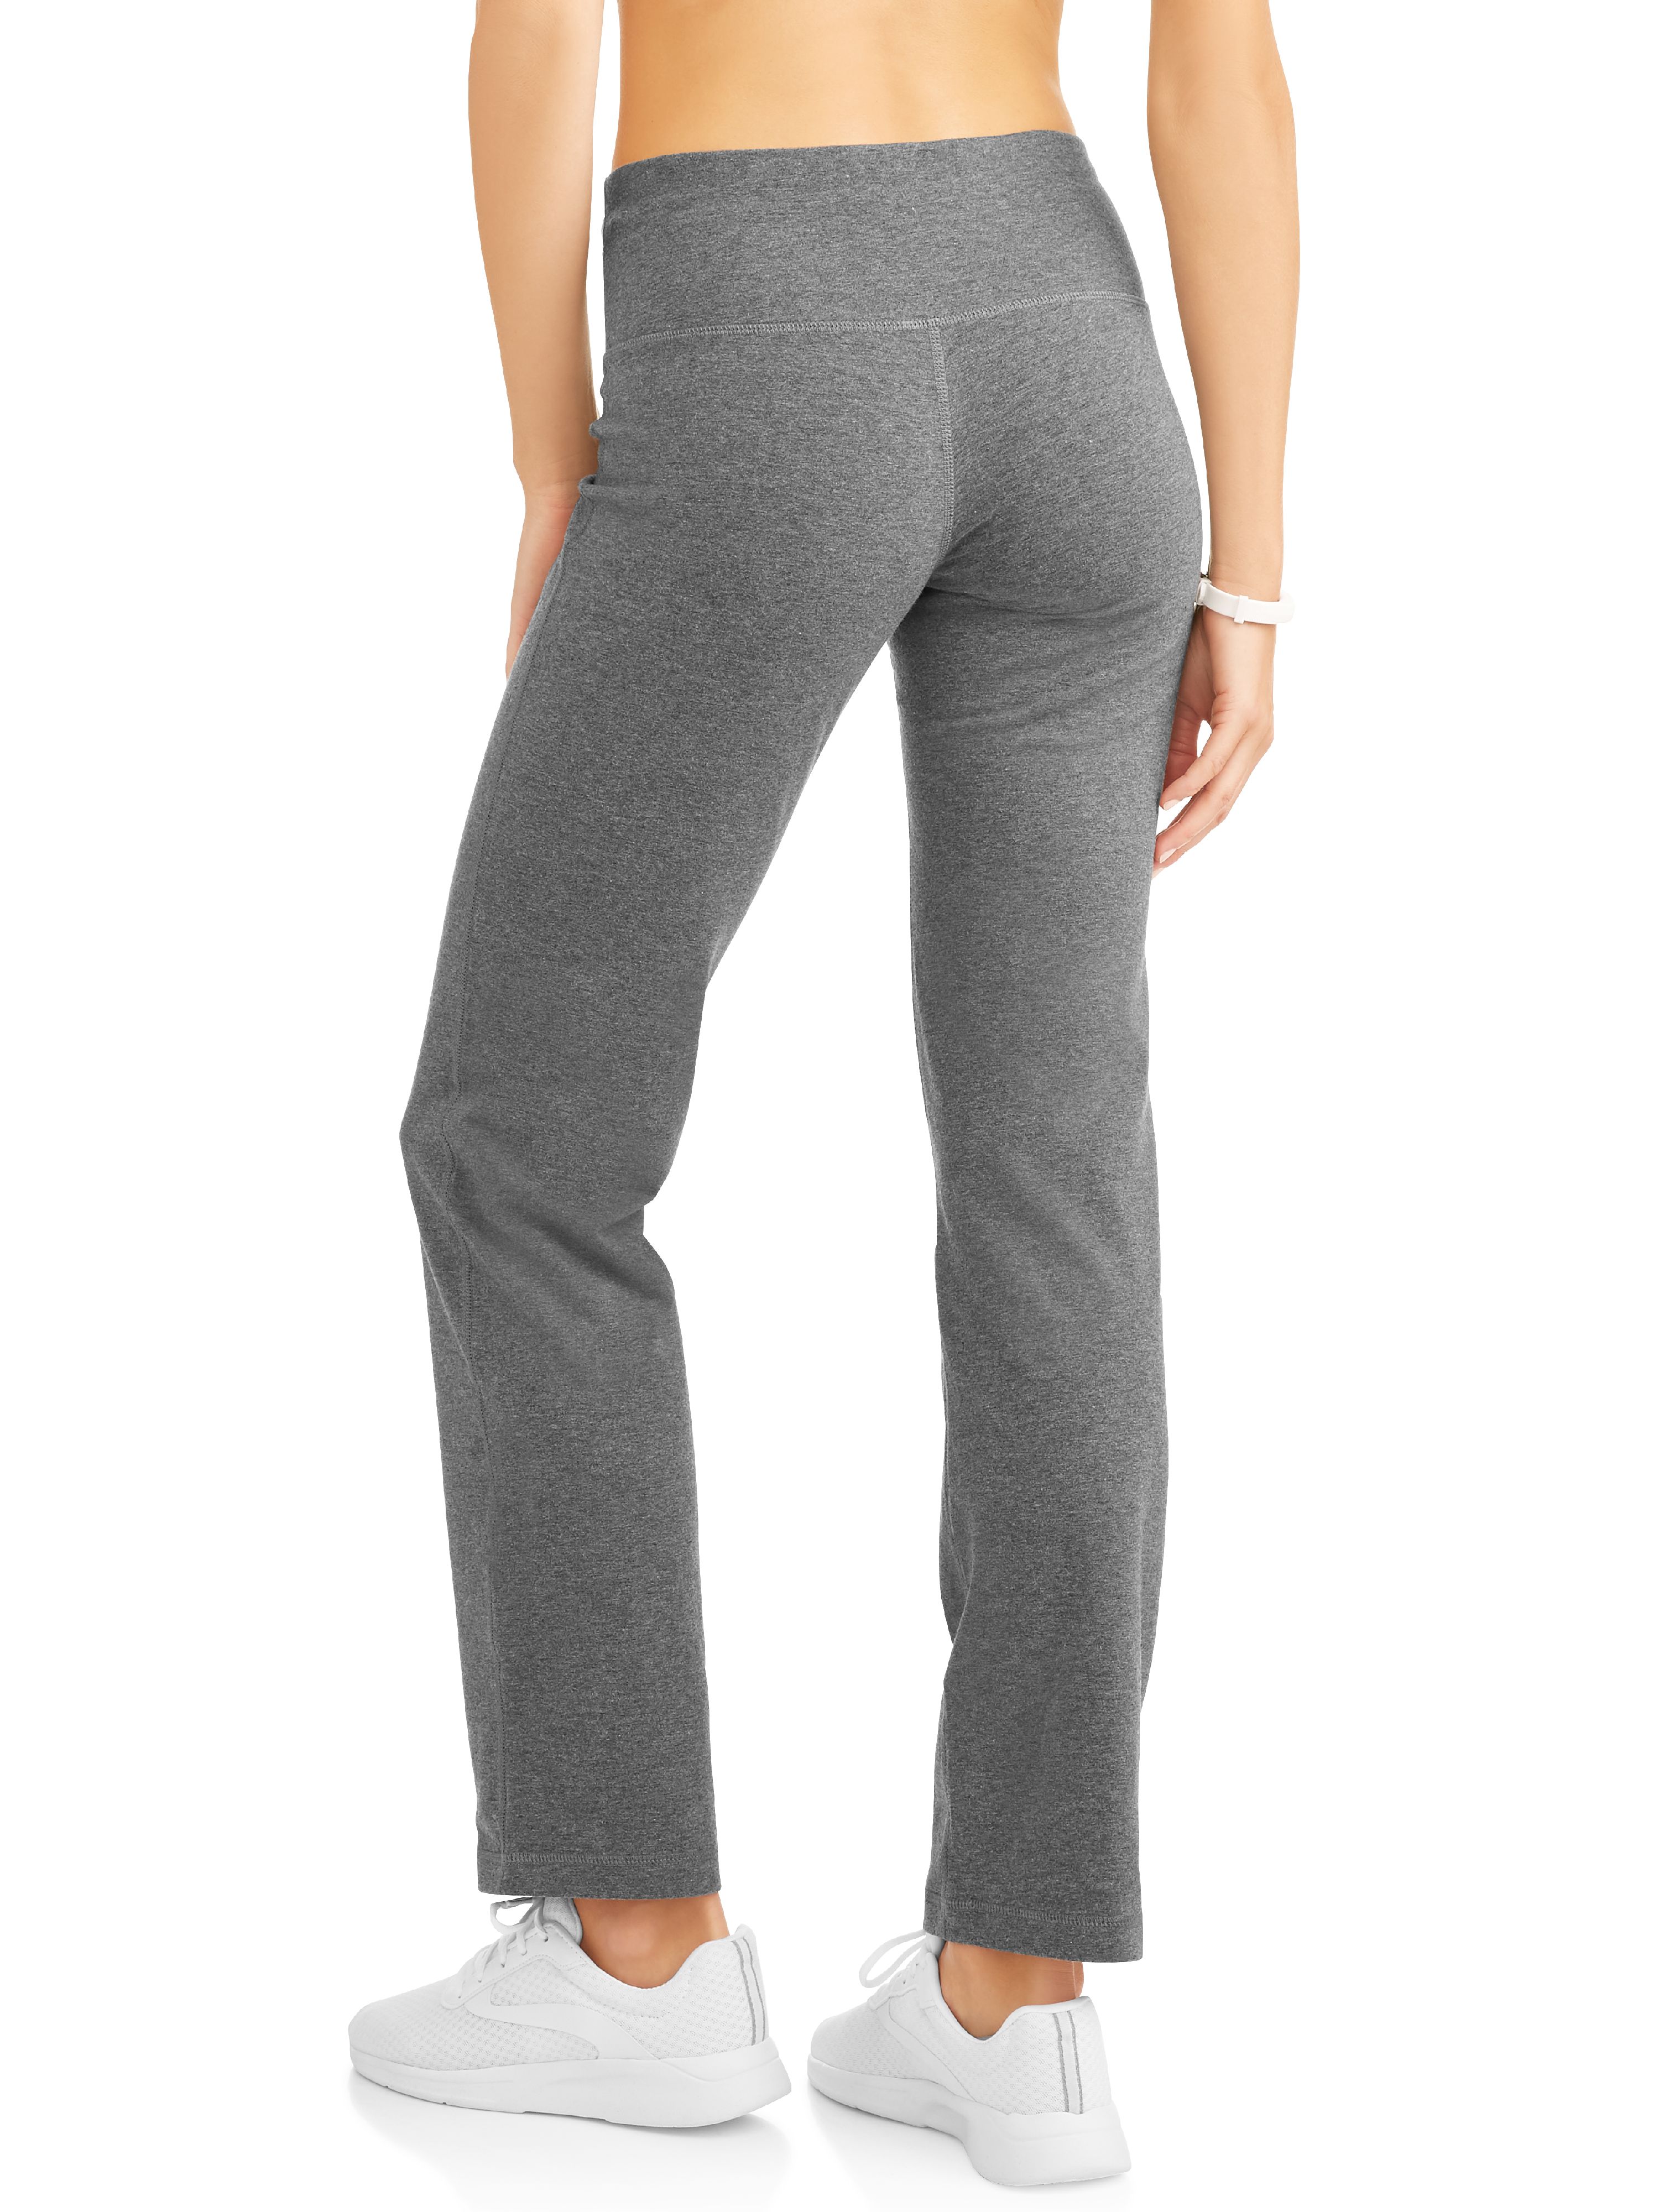 Athletic Works Women's Athleisure Performance Straight Leg Pant Available in Regular and Petite - image 2 of 4